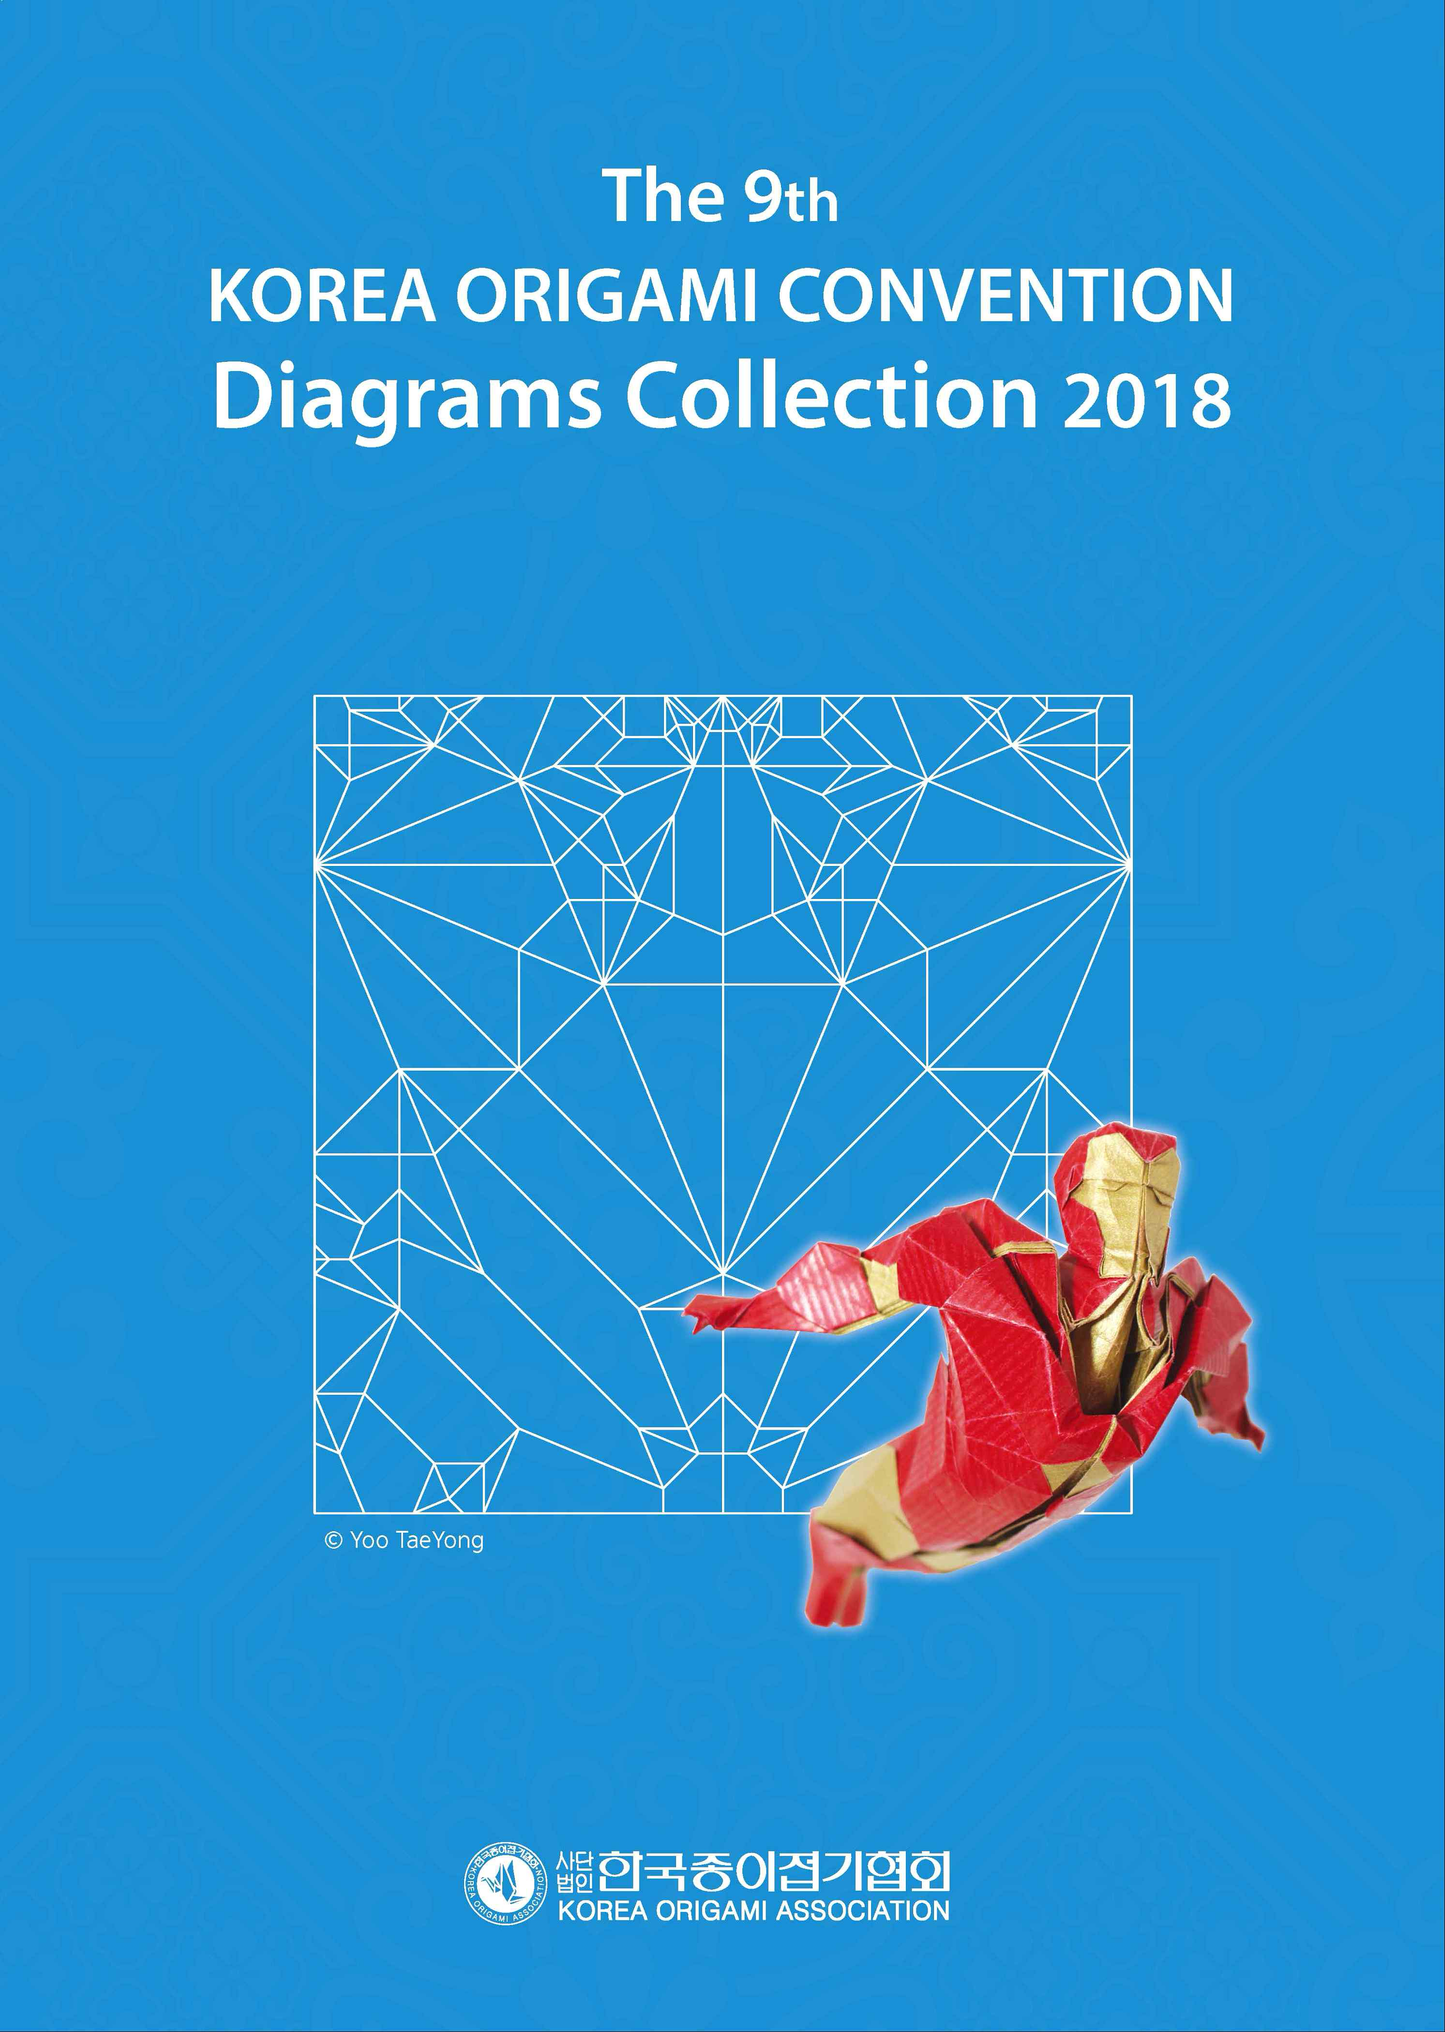 The 8 to 12th KOREA ORIGAMI CONVENTION diagrams collection 2022